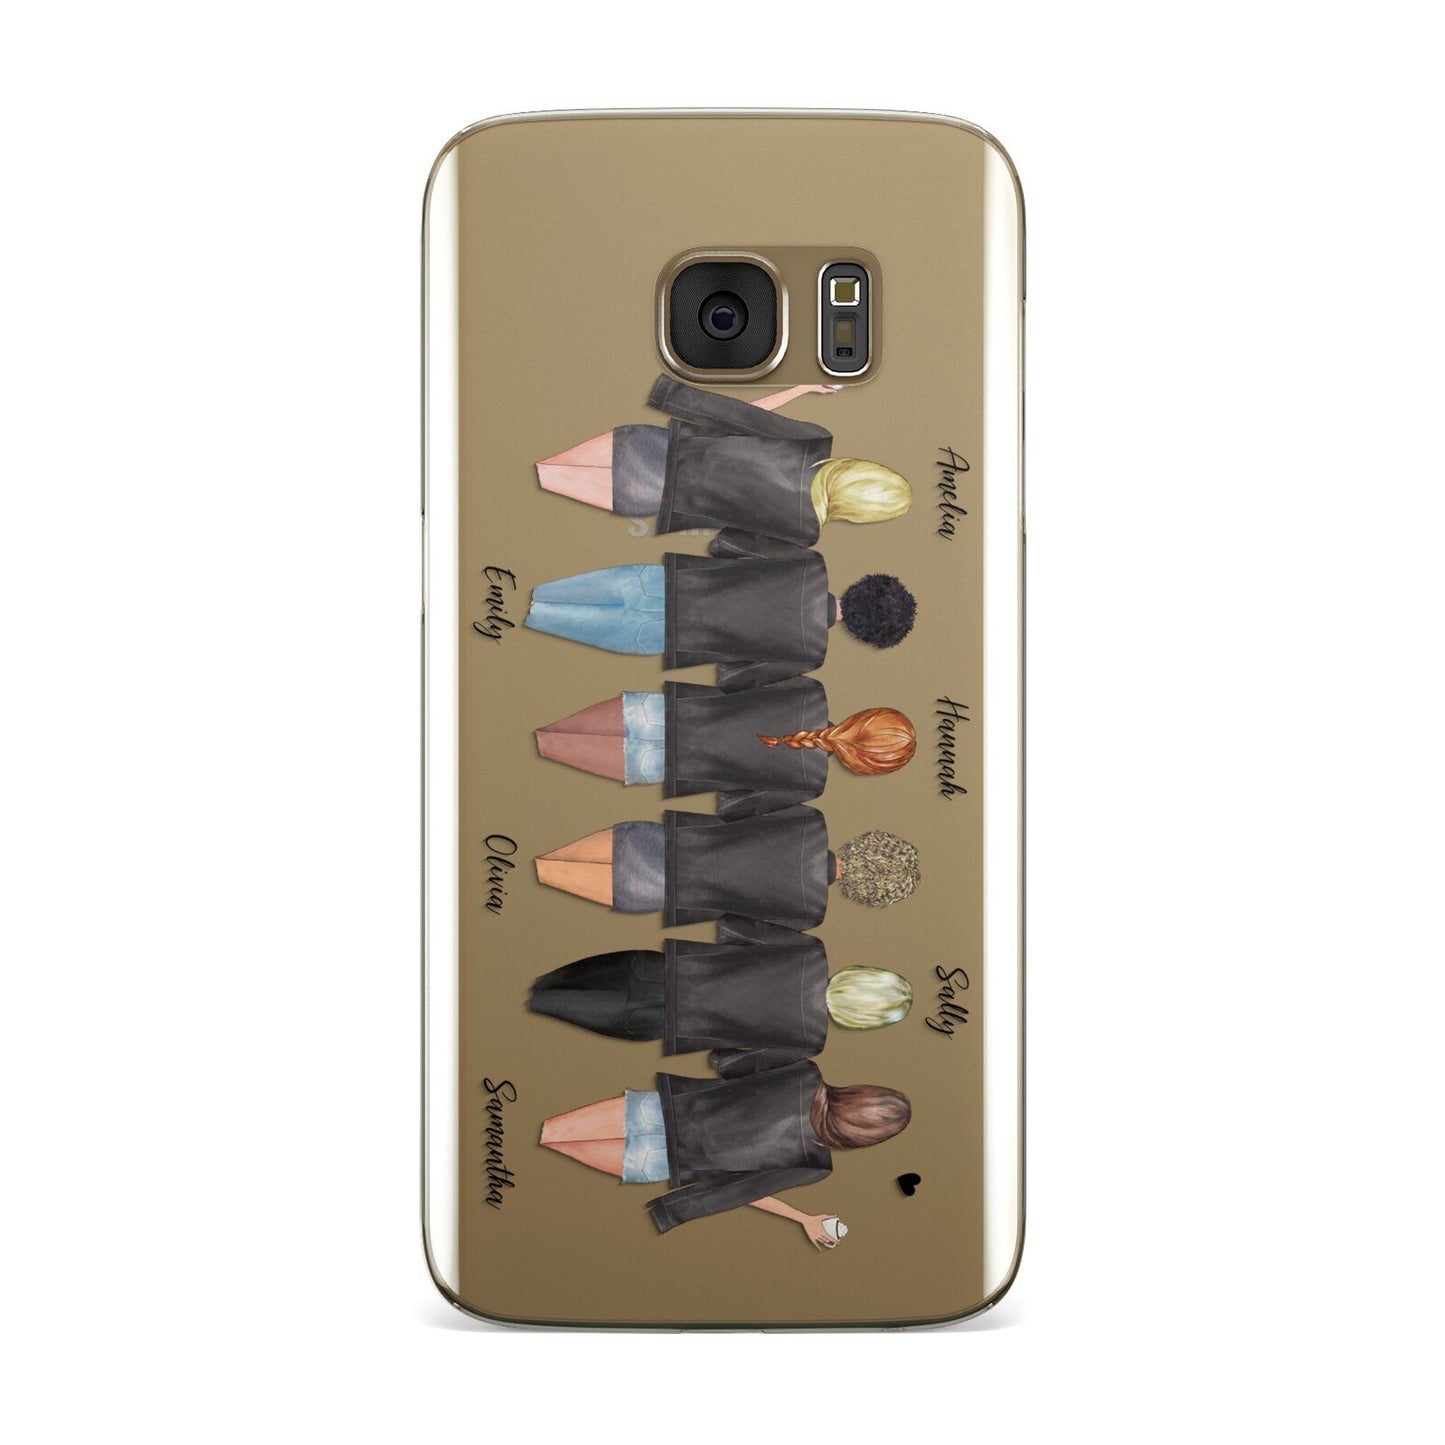 6 Best Friends with Names Samsung Galaxy Case